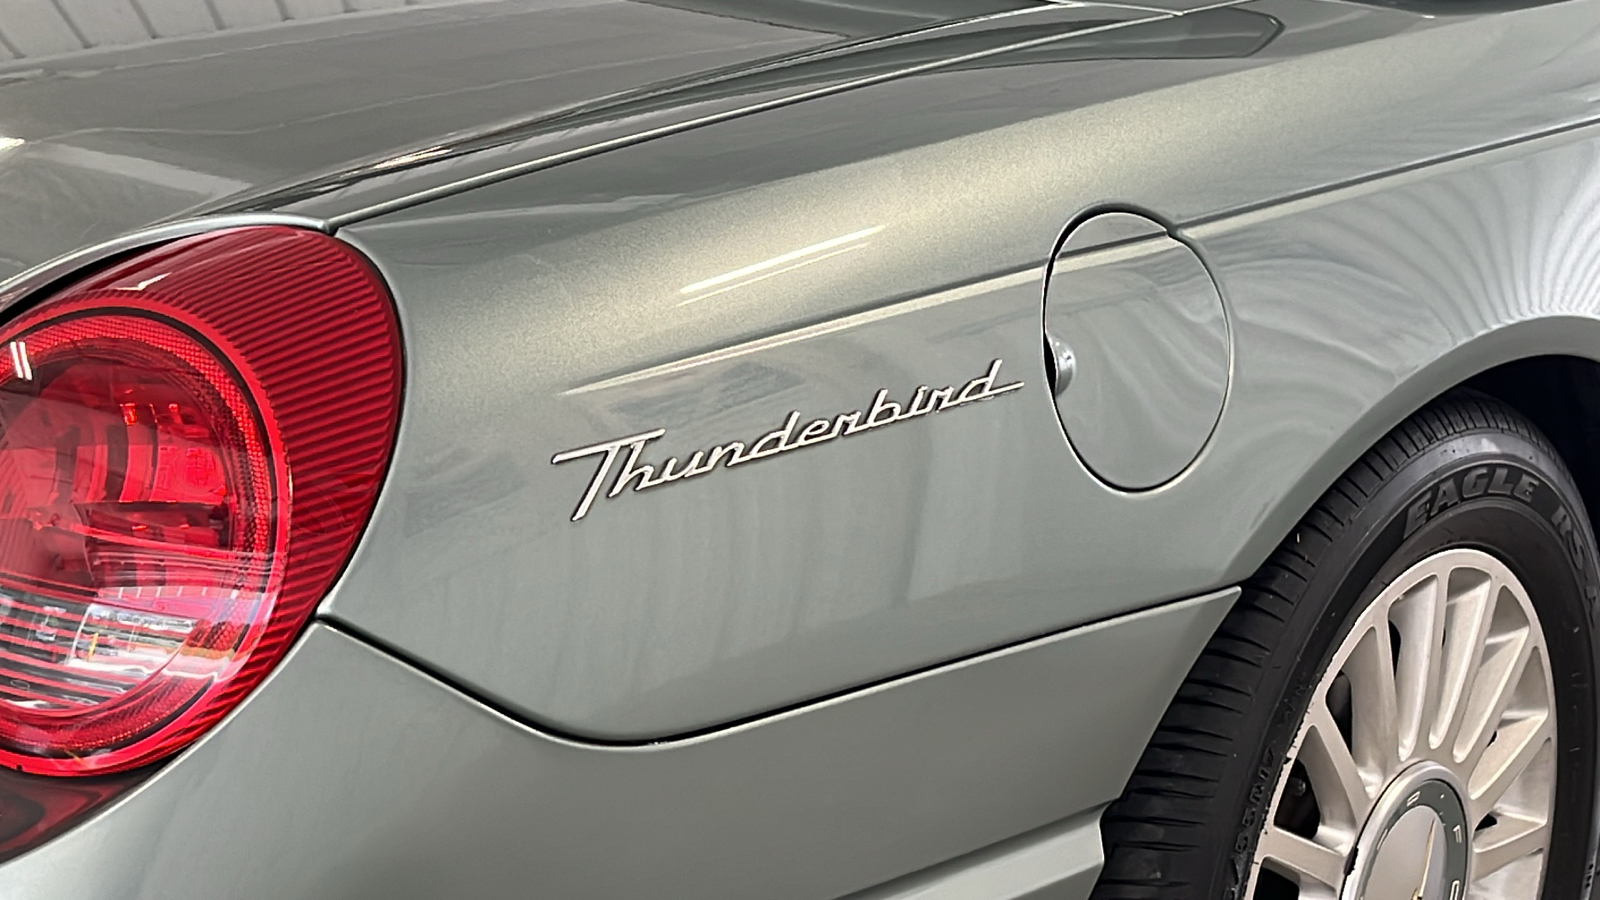 2004 Ford Thunderbird Pacific Coast Roadster 24